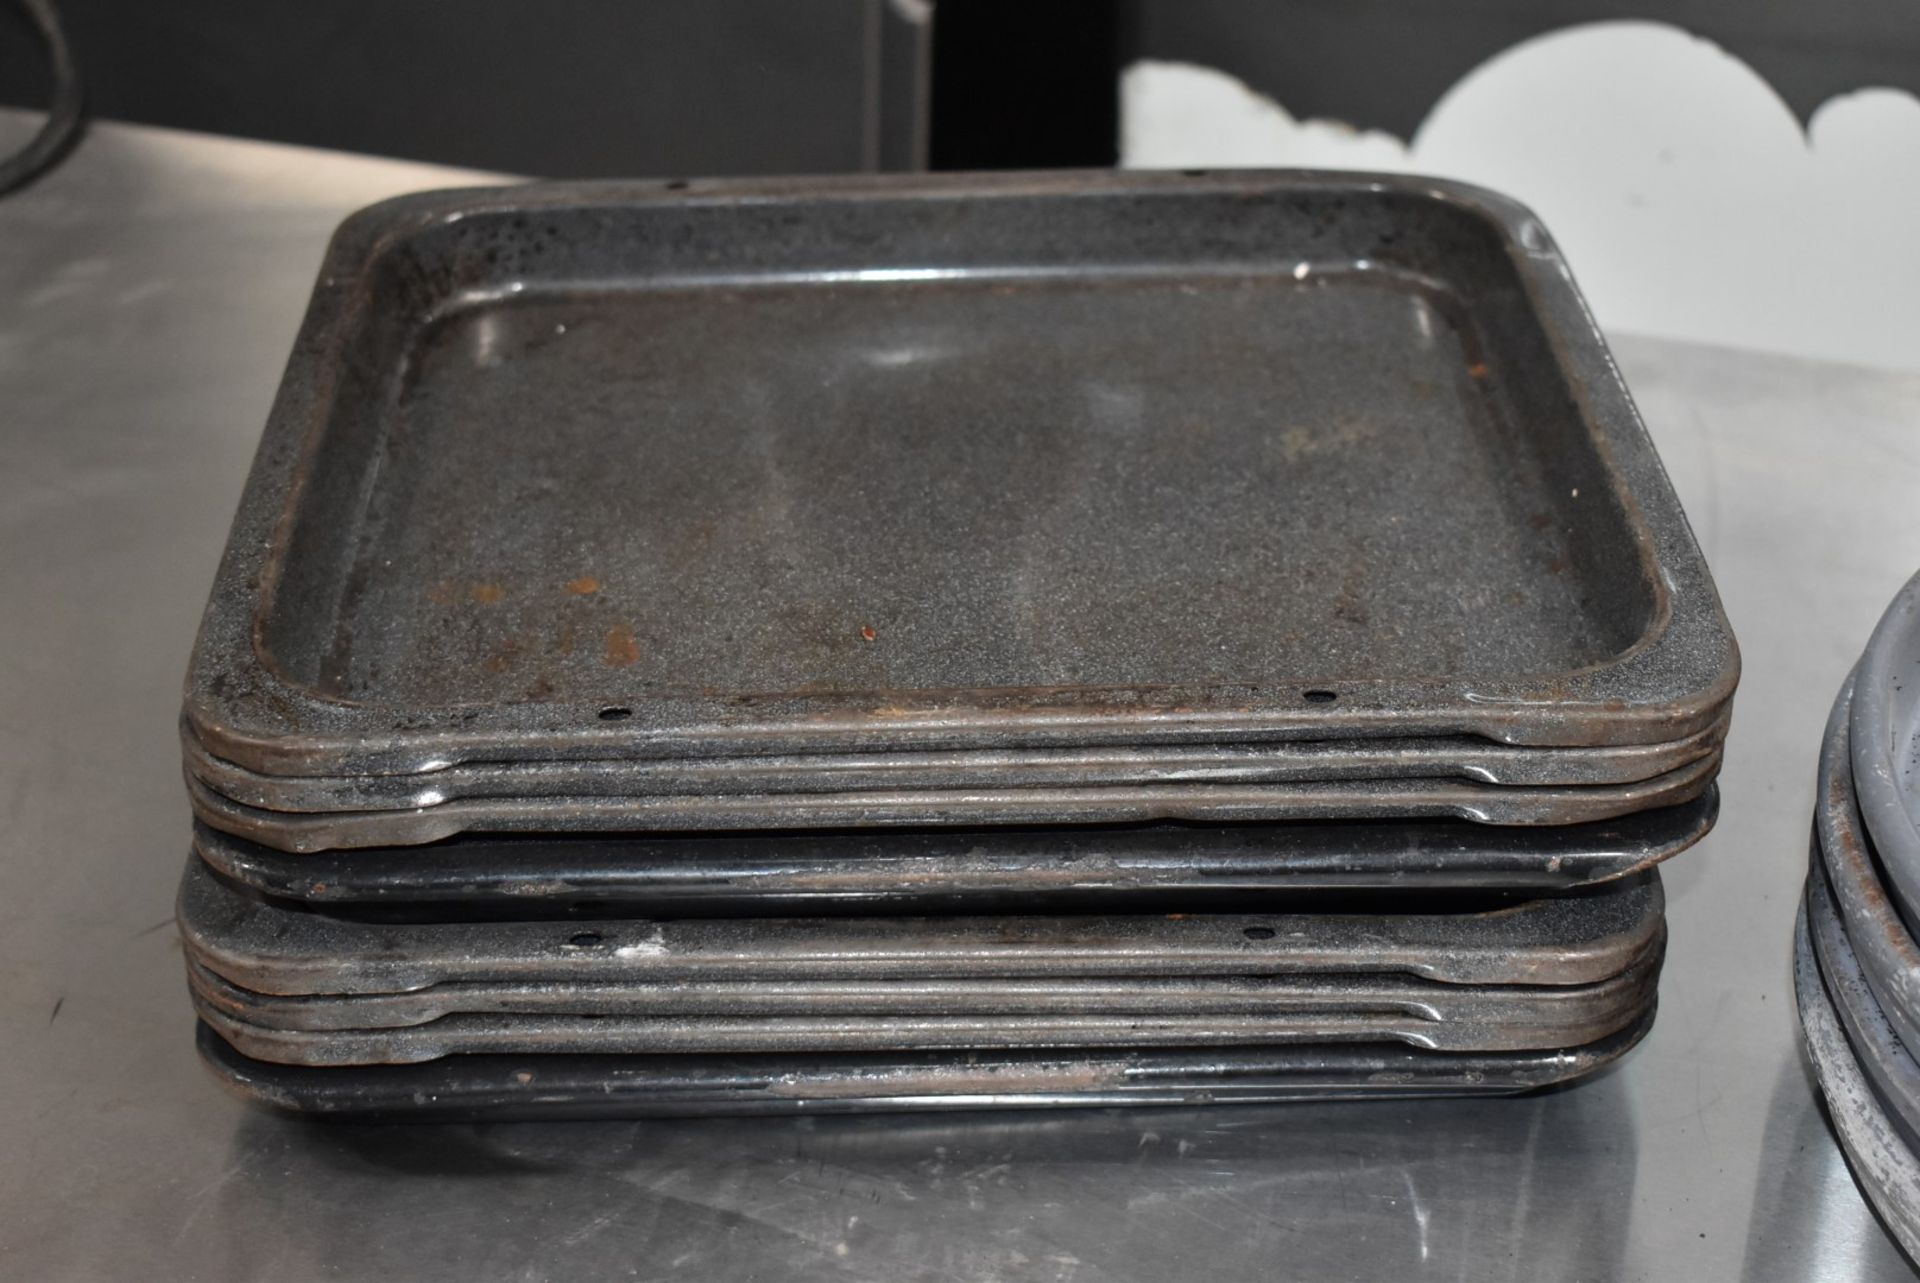 Assorted Collection of 12 x Cooking Trays - Includes 12" Pizza Trays and Deep Oven Trays 32 x 28 cms - Image 4 of 6